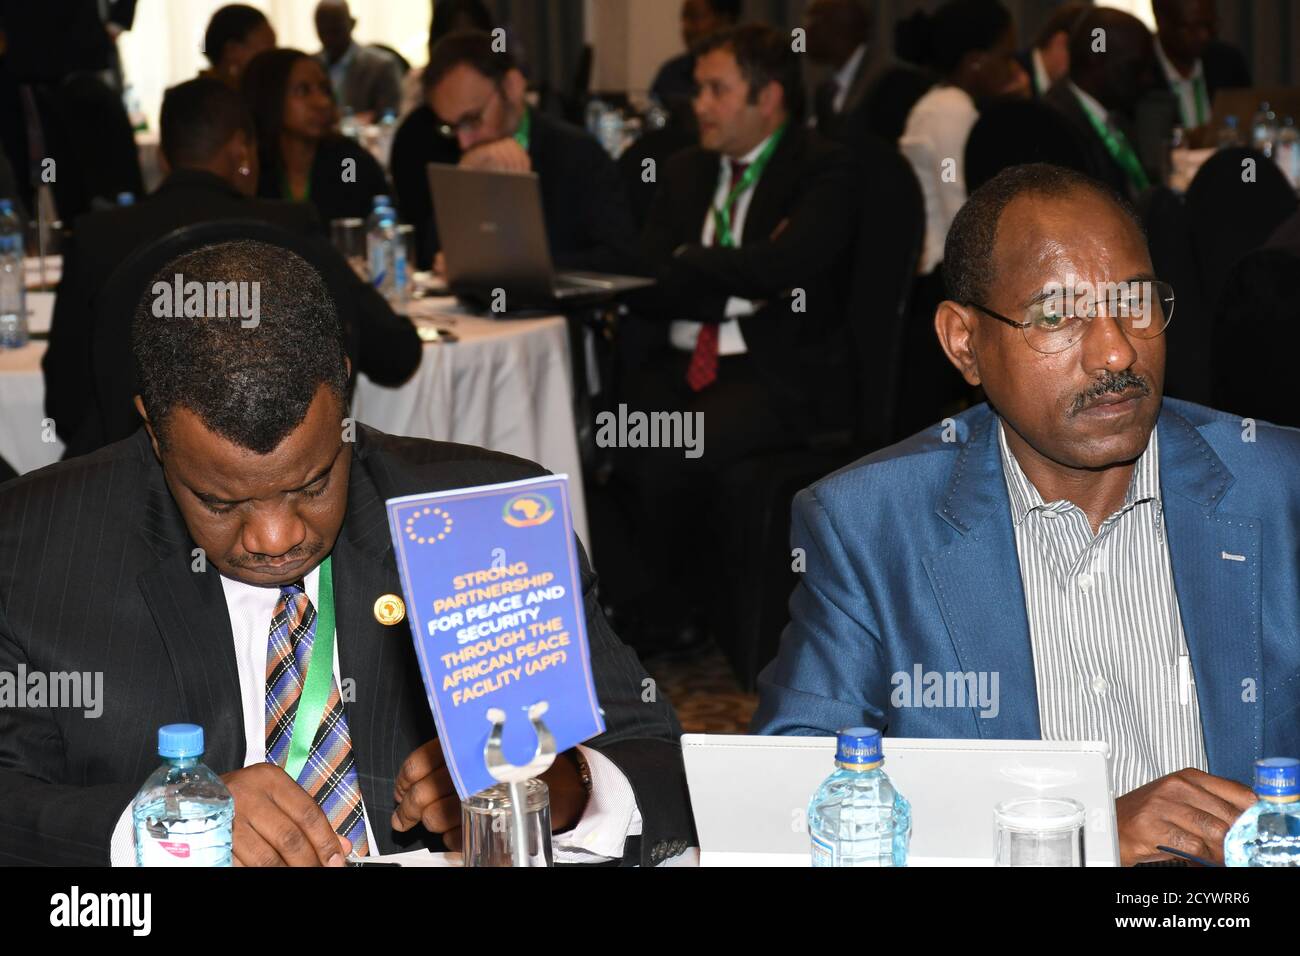 Officials of the African Union Mission in Somalia (AMISOM) and representatives of international partners attend the opening of a two-day AMISOM Budget meeting in Nairobi, Kenya on 04 April 2019. The meeting reviewed the AMISOM budget for 2018 and discussed the mission's budgetary requirements for the coming year, 2020. Stock Photo